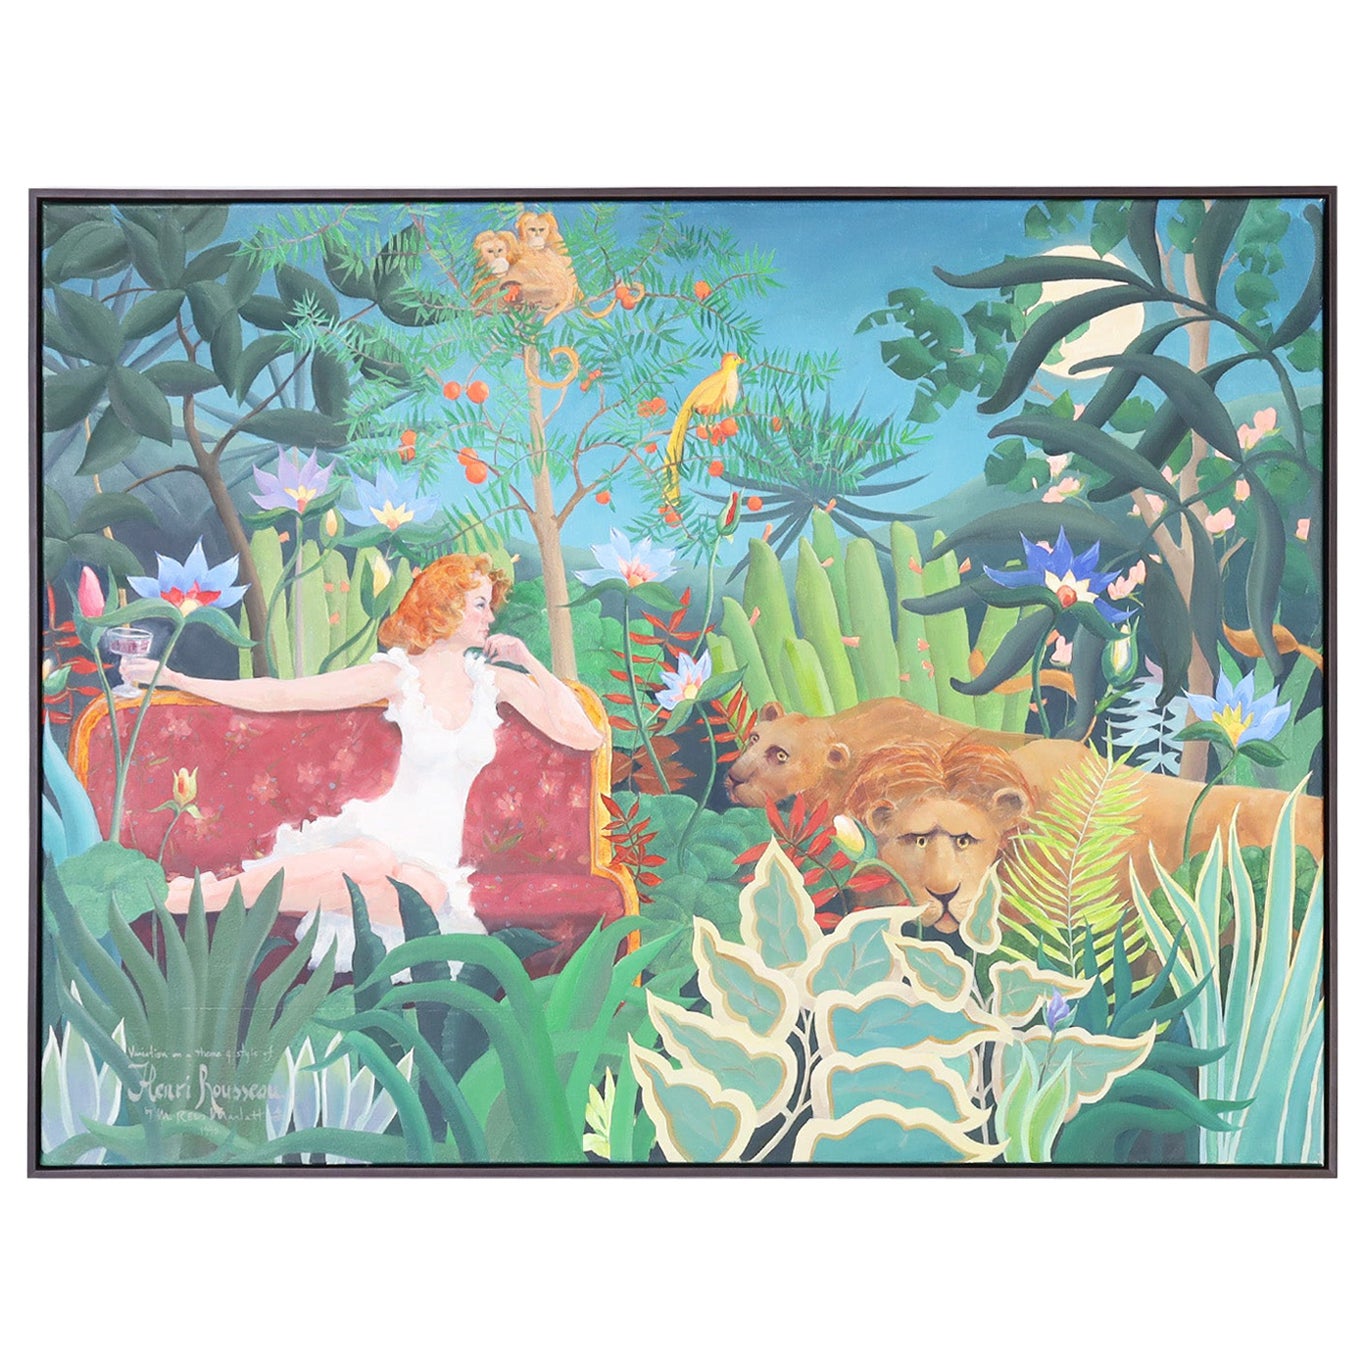 Painting on Canvas of a Jungle with Cats, Monkeys, and a Woman